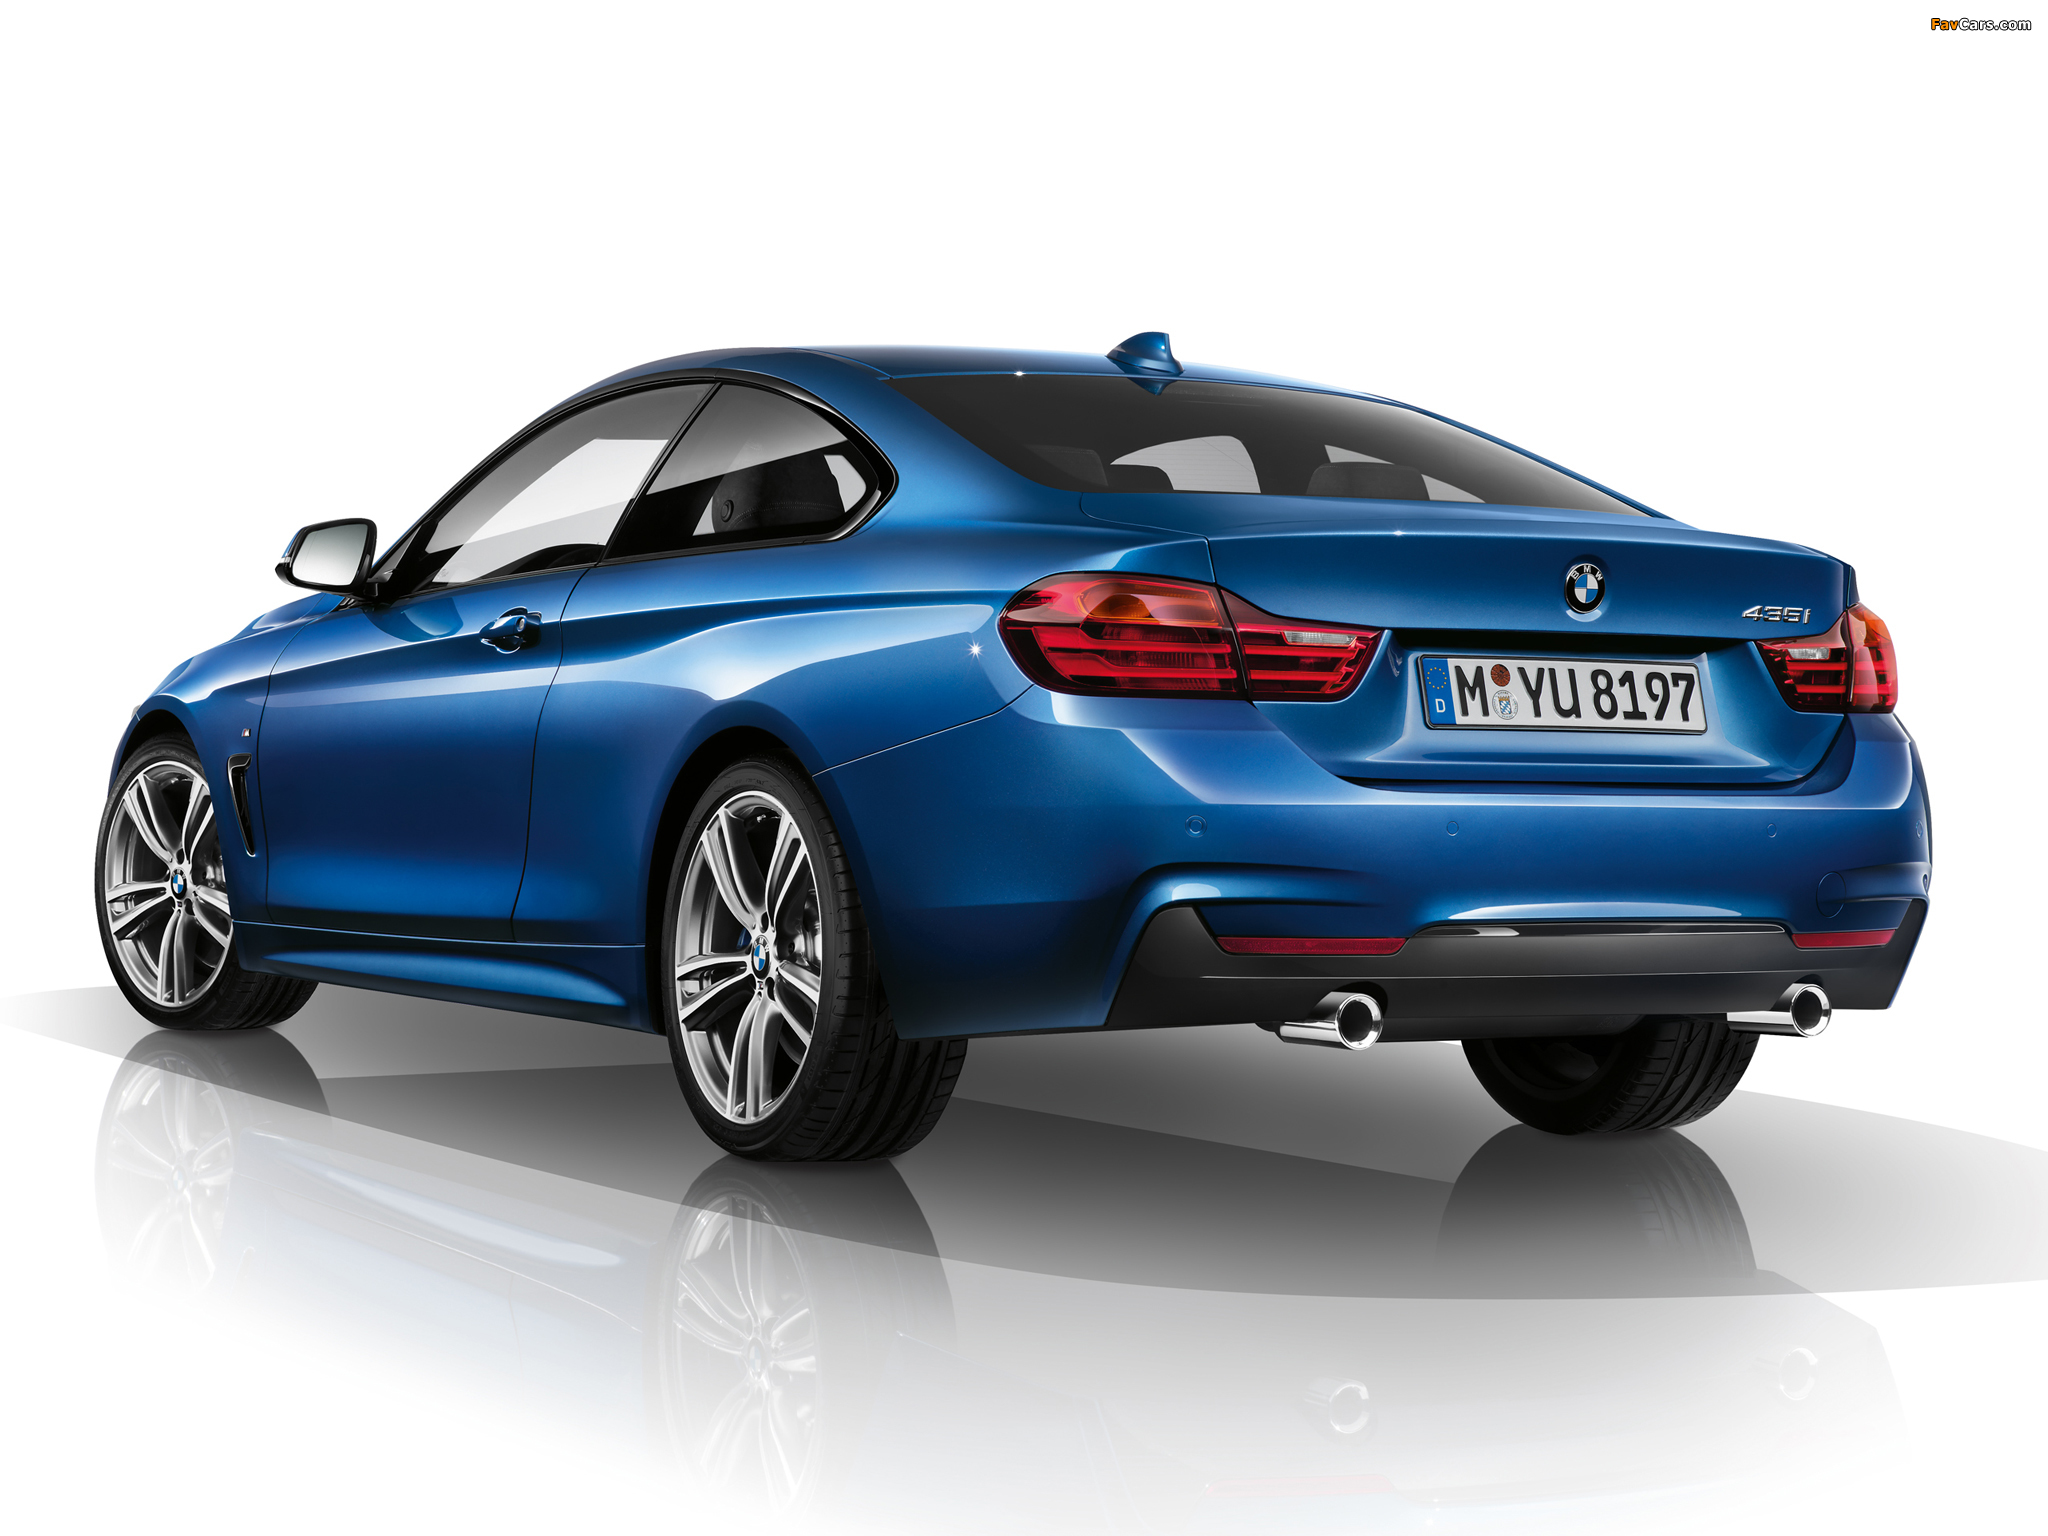 BMW 435i Coupé M Sport Package (F32) 2013 pictures (2048 x 1536)